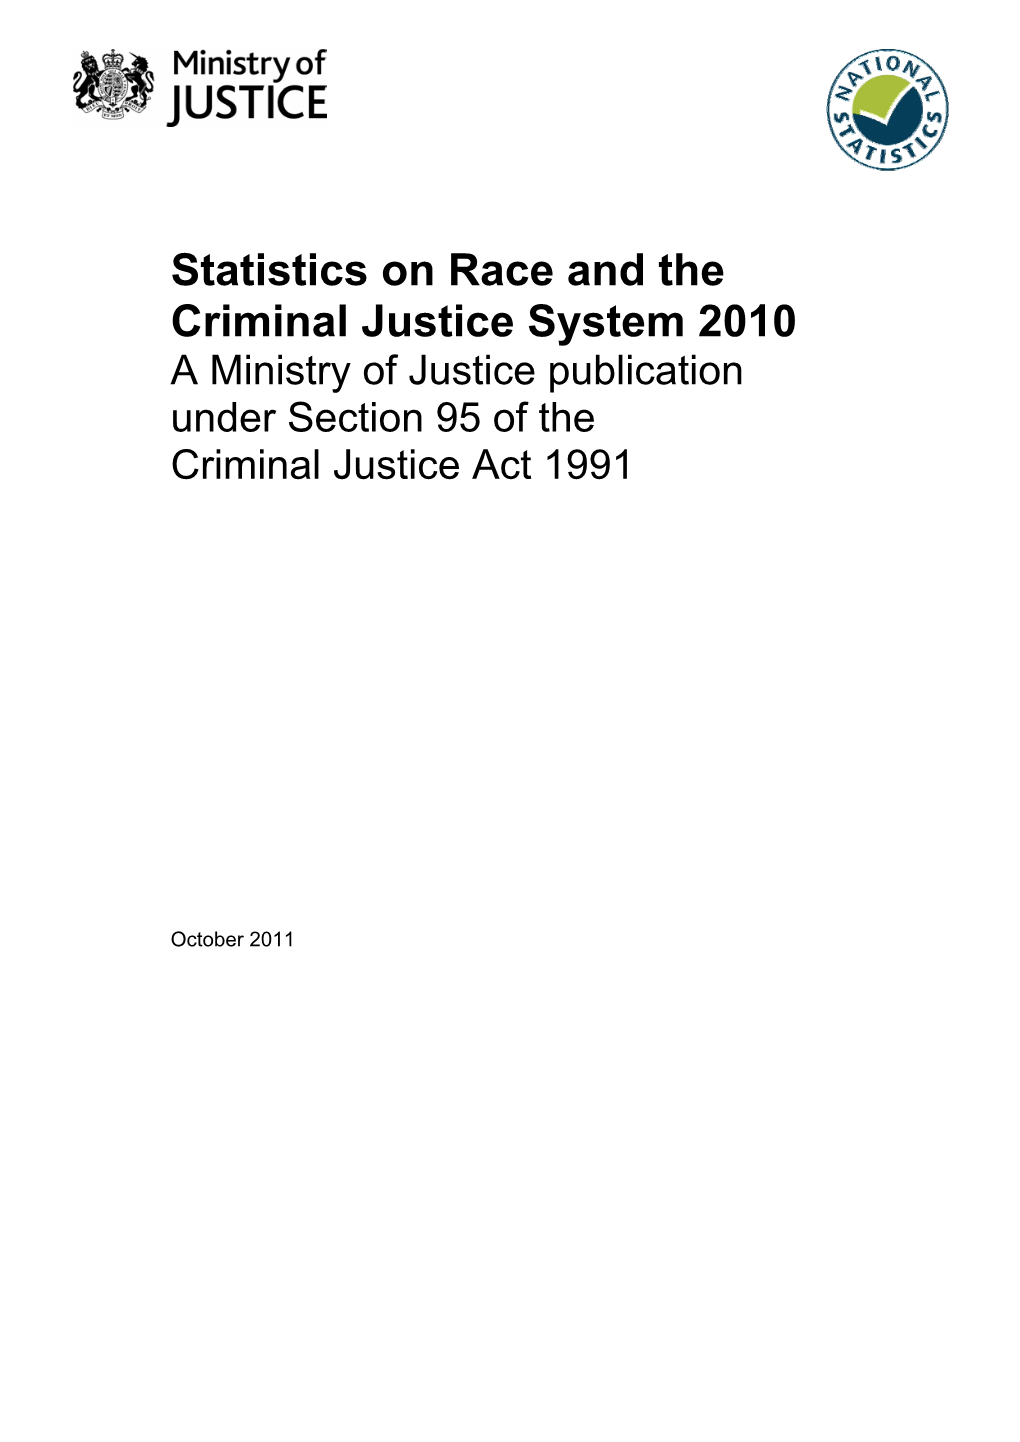 Statistics on Race and the Criminal Justice System 2010 a Ministry of Justice Publication Under Section 95 of the Criminal Justice Act 1991